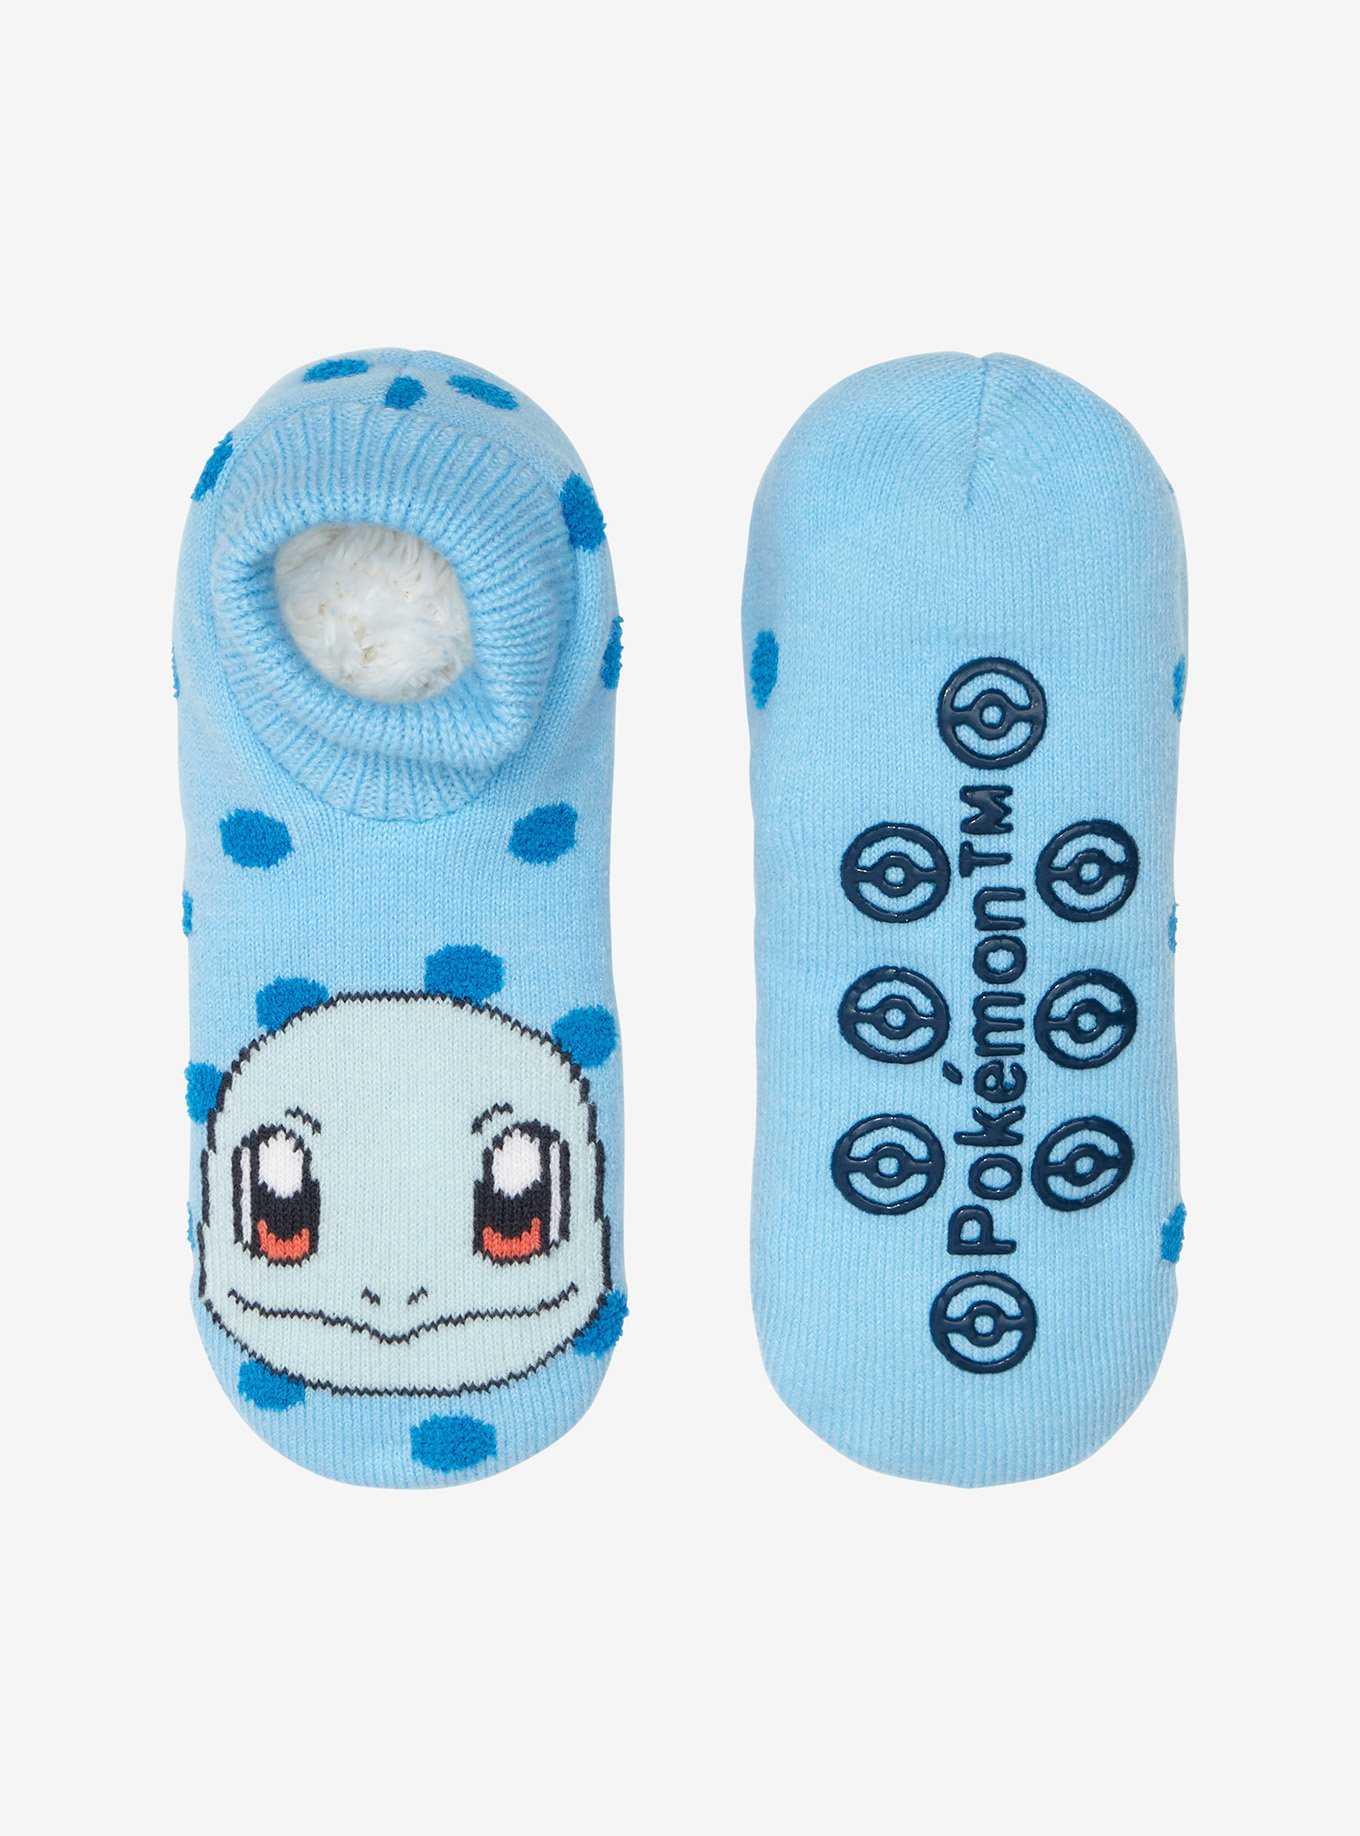 Pokémon Squirtle Slipper Socks - BoxLunch Exclusive, , hi-res